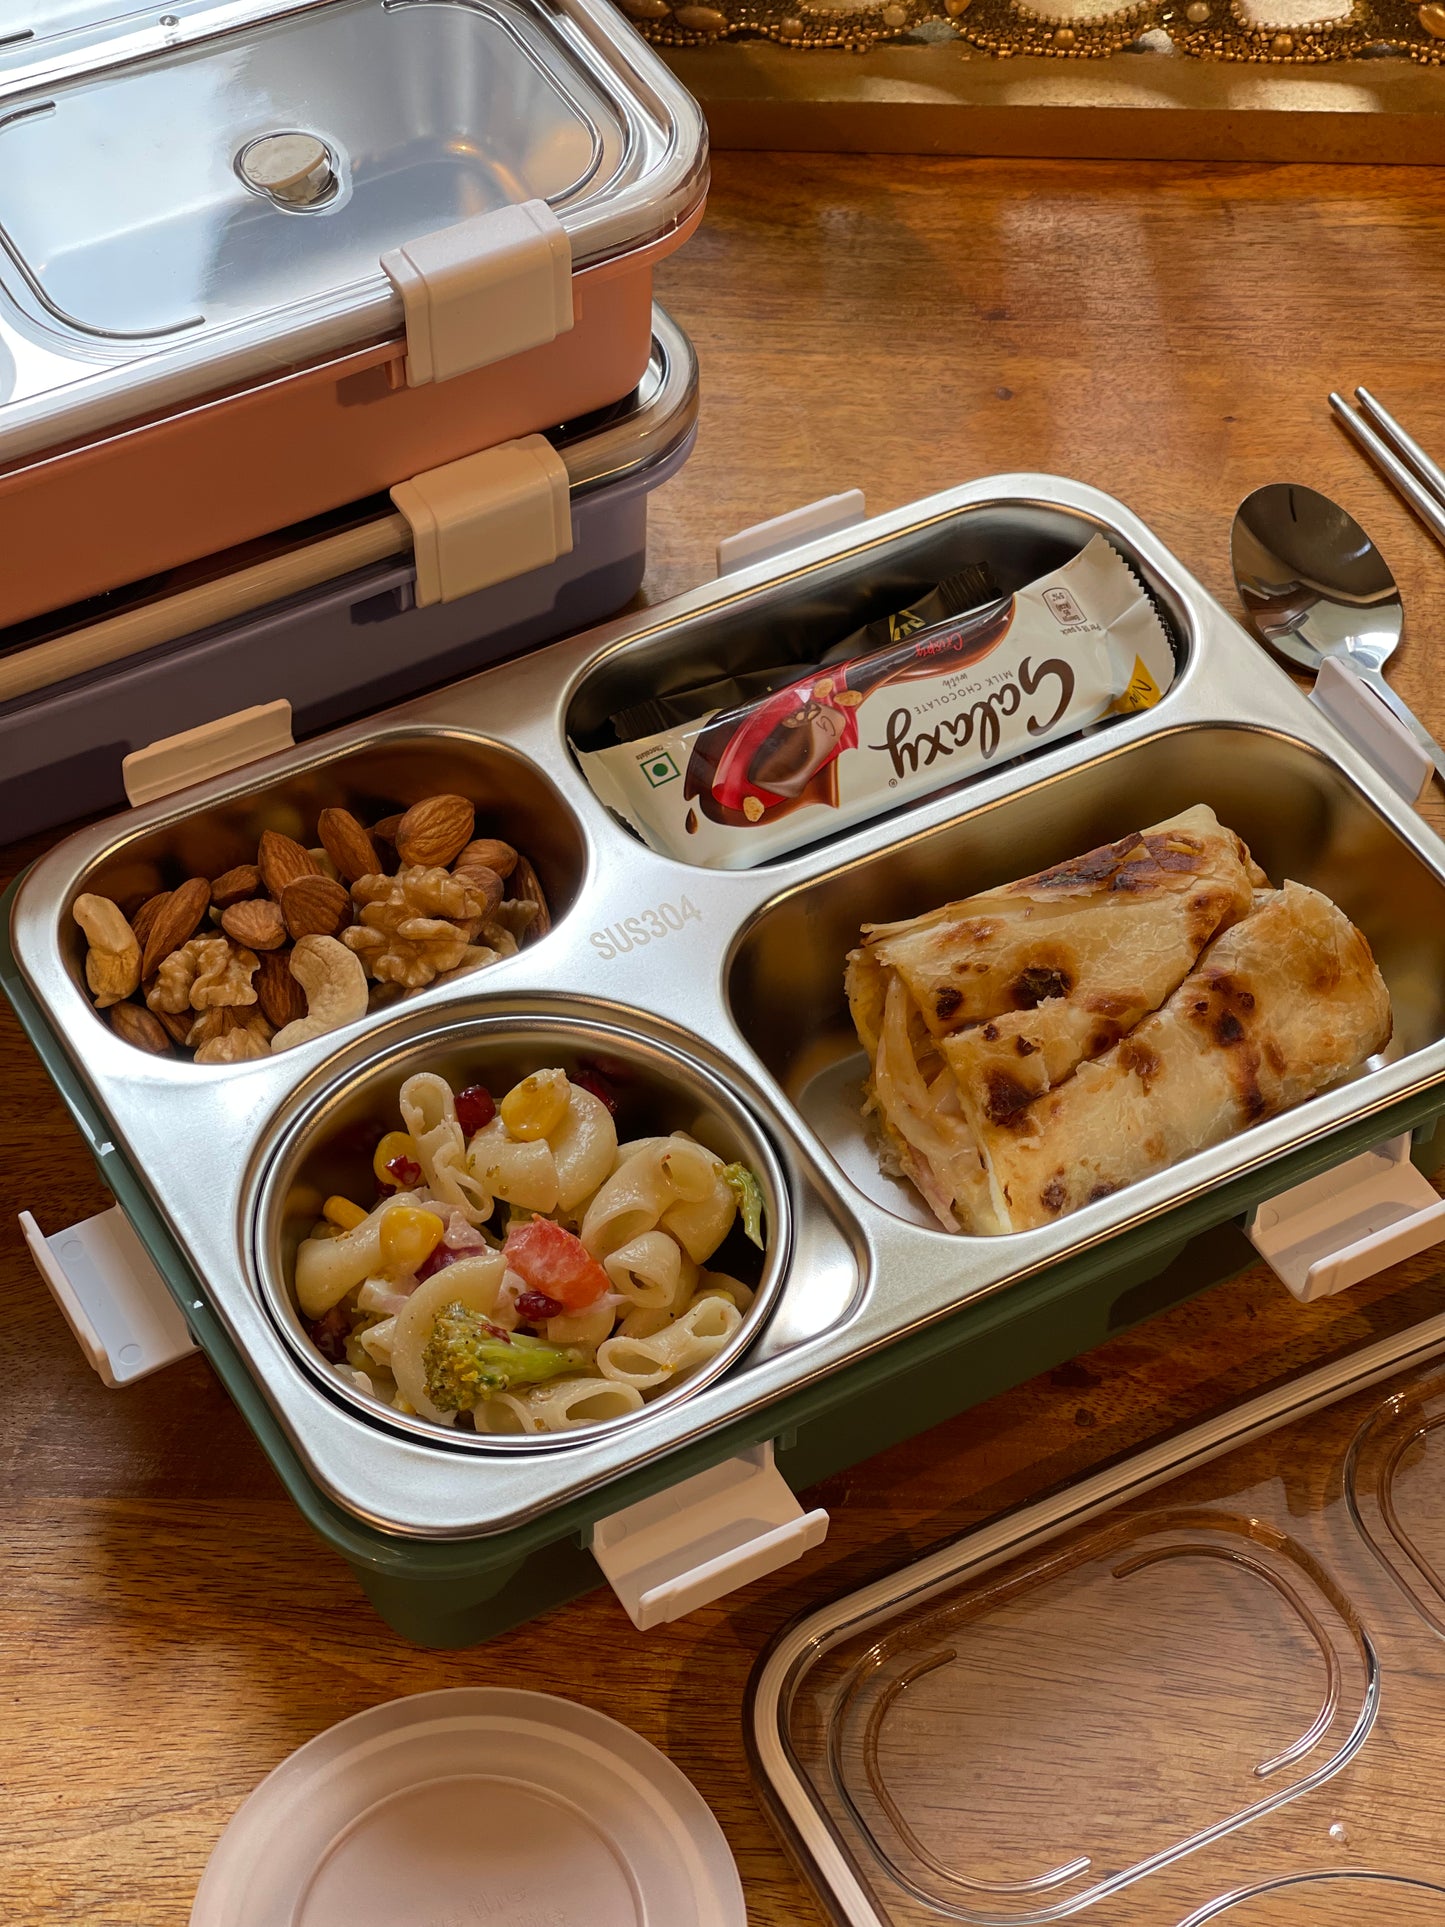 Meal Station Stainless Steel lunch box